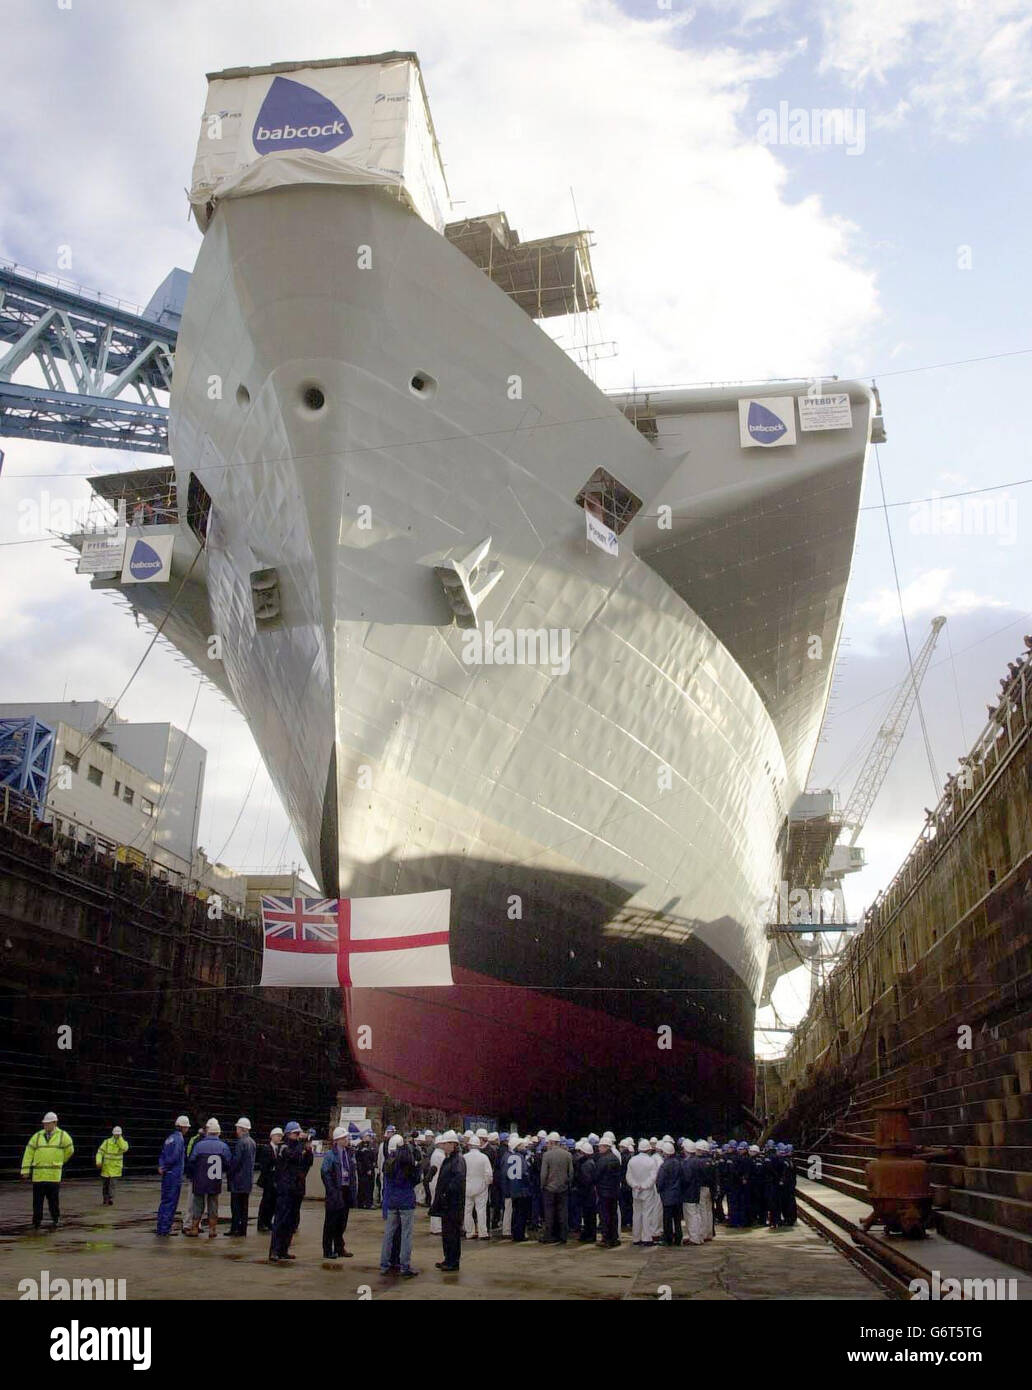 Royal Navy Aircraft Carrier HMS Illustrious finishes its refit at Rosyth Dockyard. Her docking marks the half way stage in the ships multi-million pound refit, her first since 1994. She is due to be undocked on Friday in a major step towards her return to full fitness for duty at sea . Stock Photo